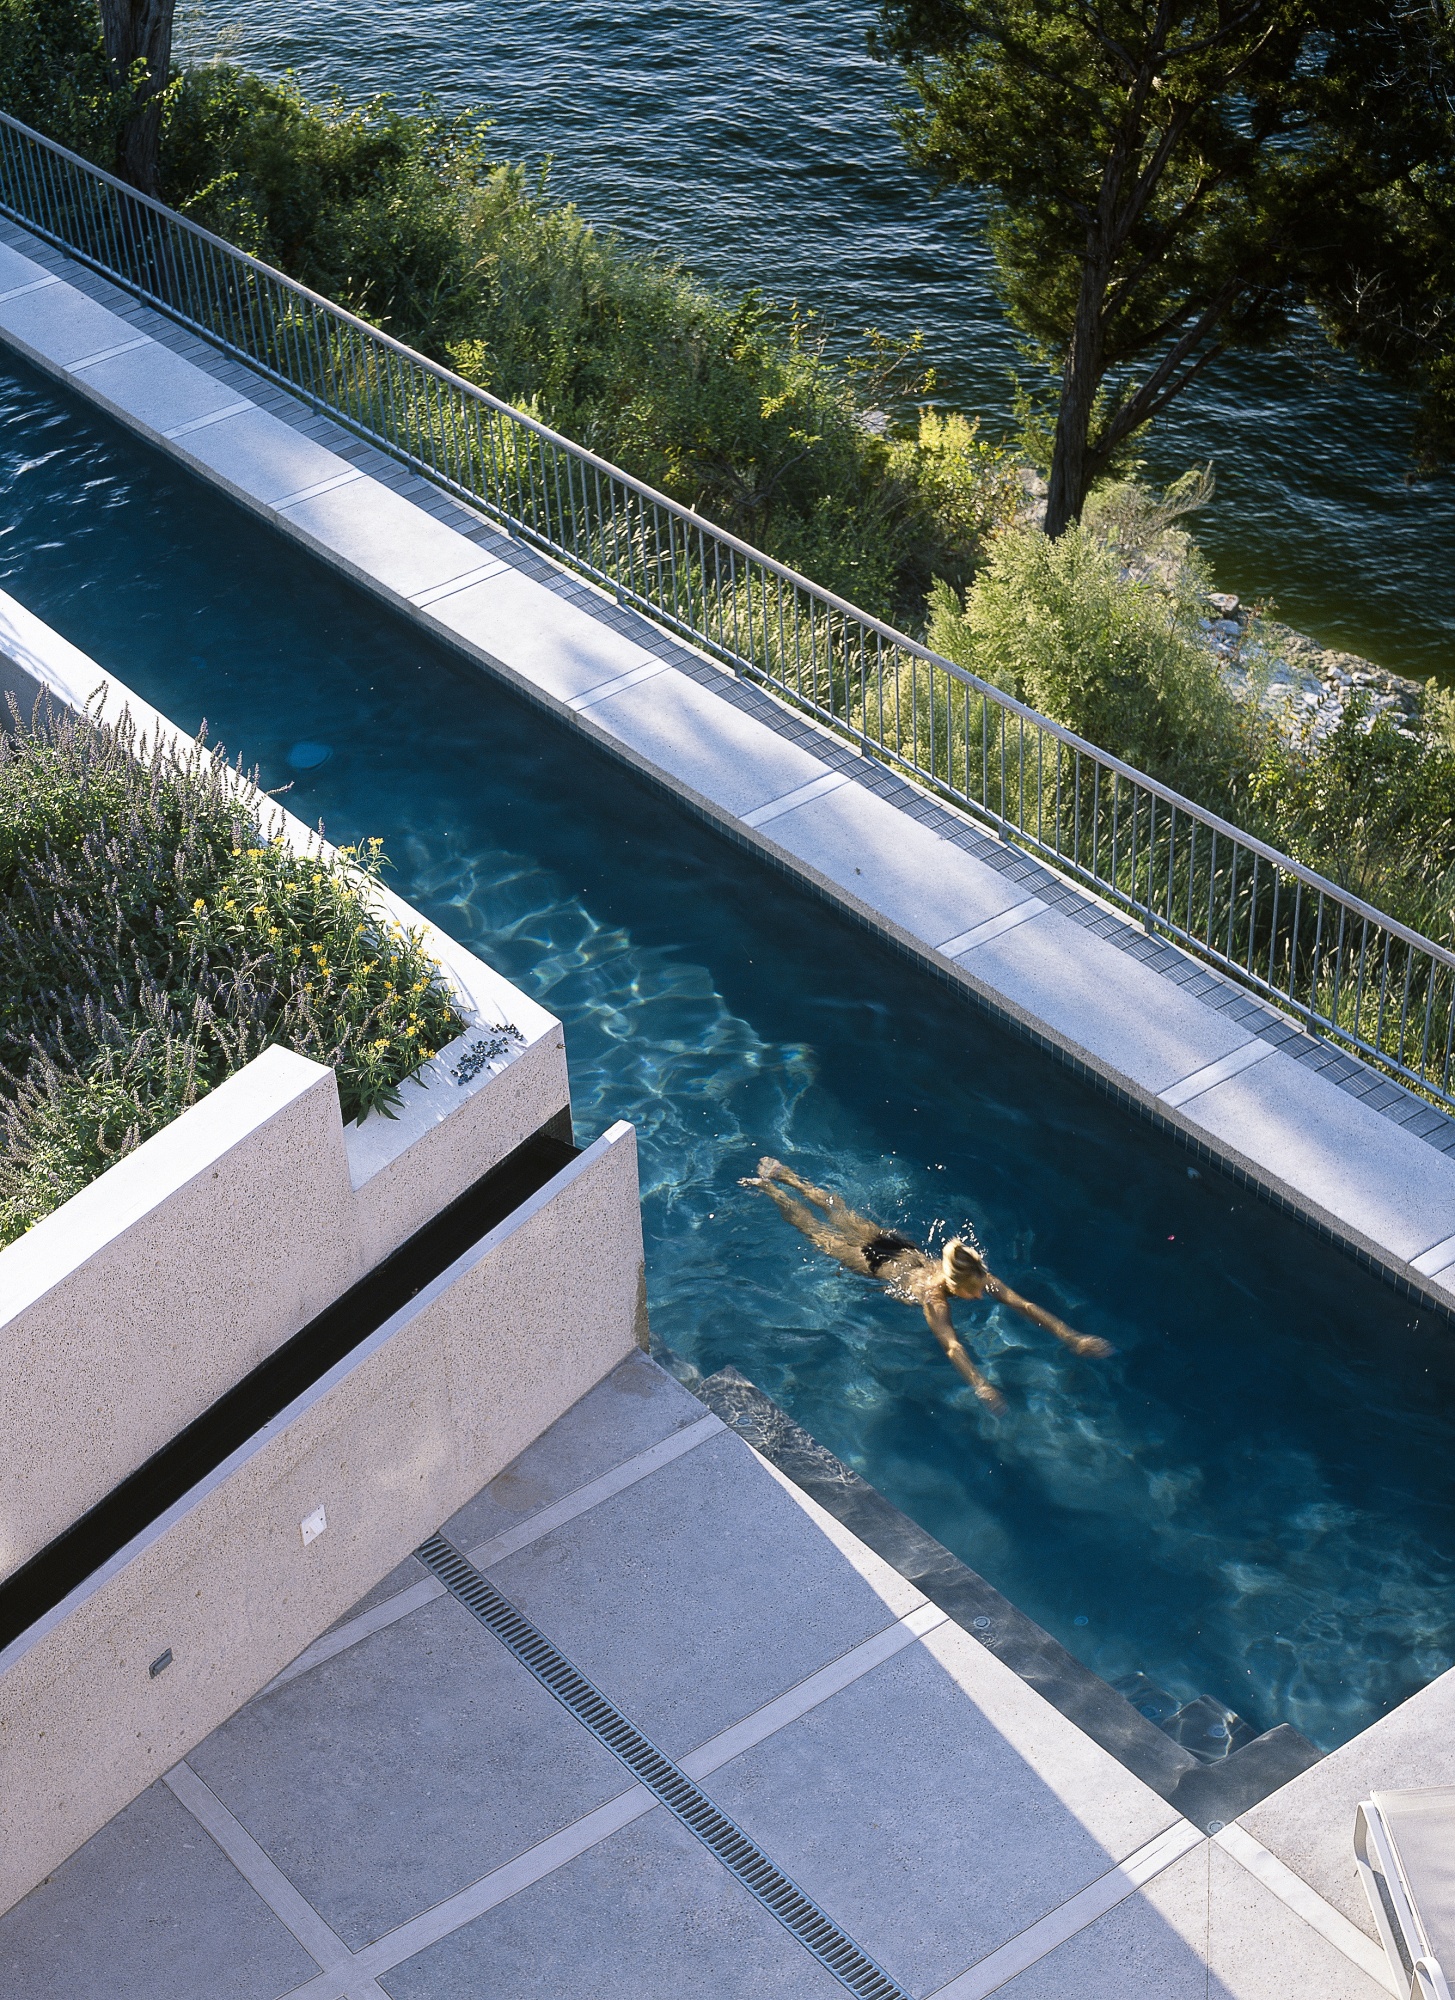 Polished concrete patio and coping frame this lap pool.